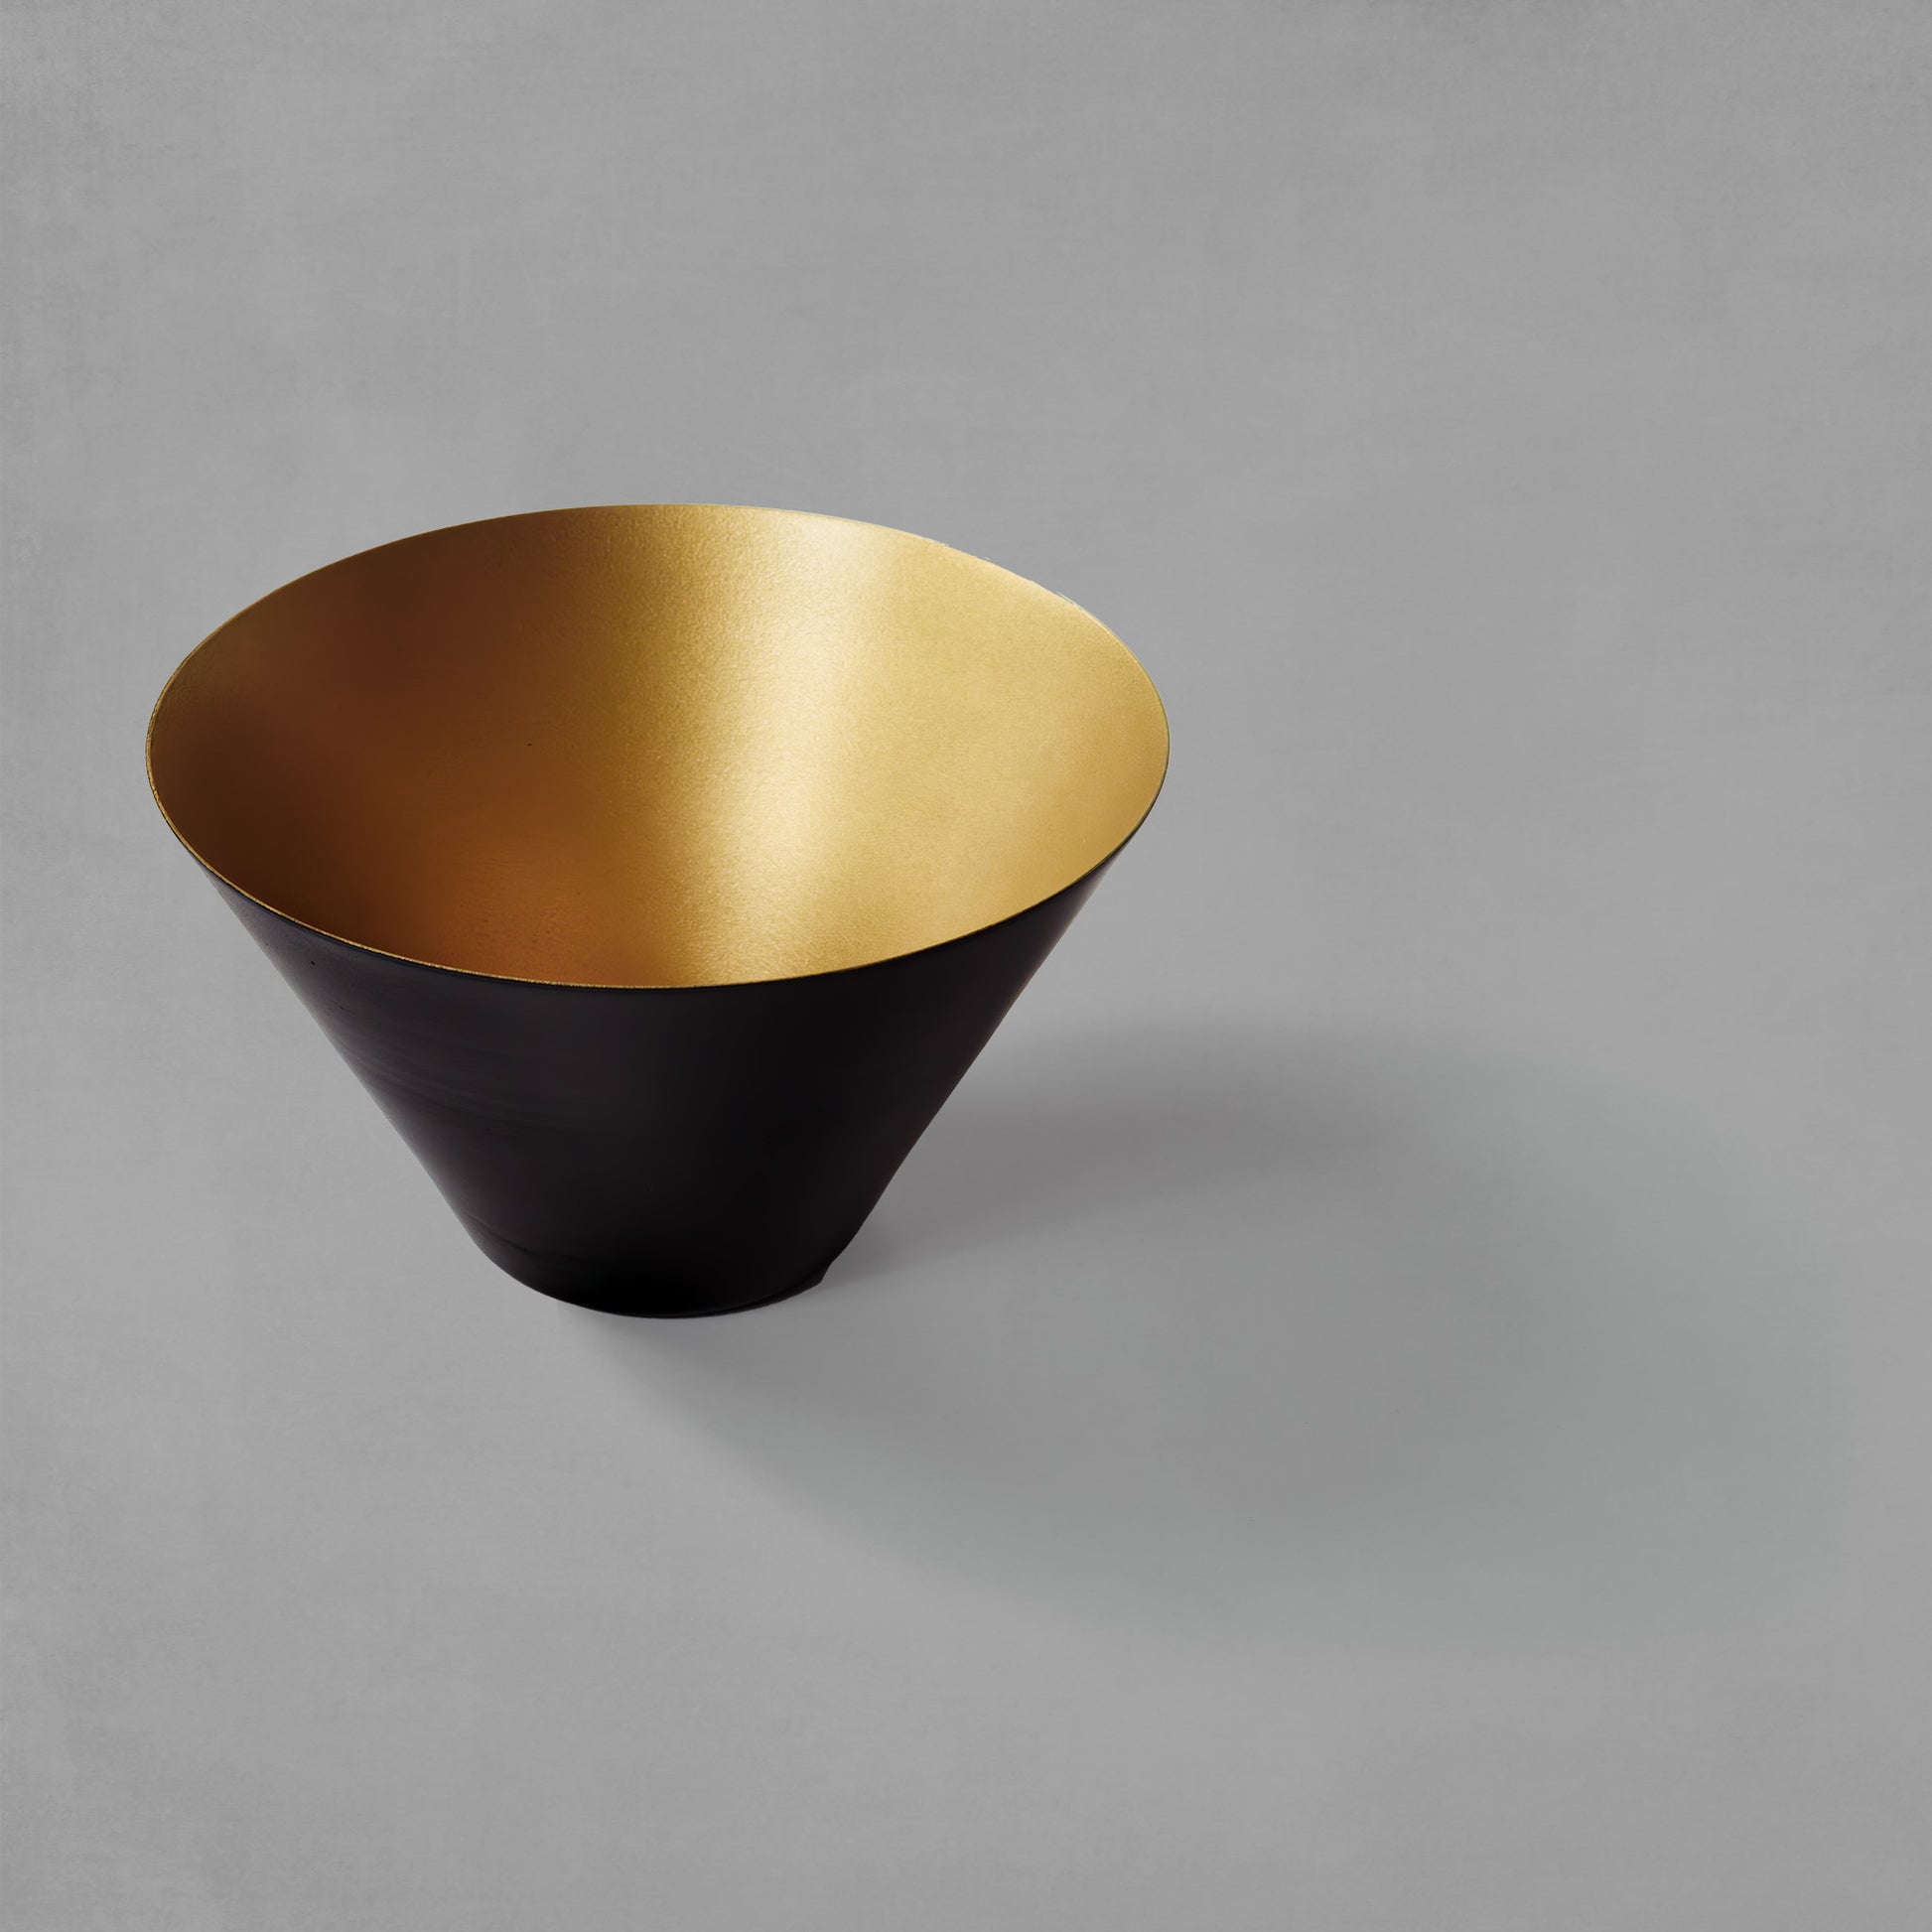 Small decorative black and gold bowl with gray background.